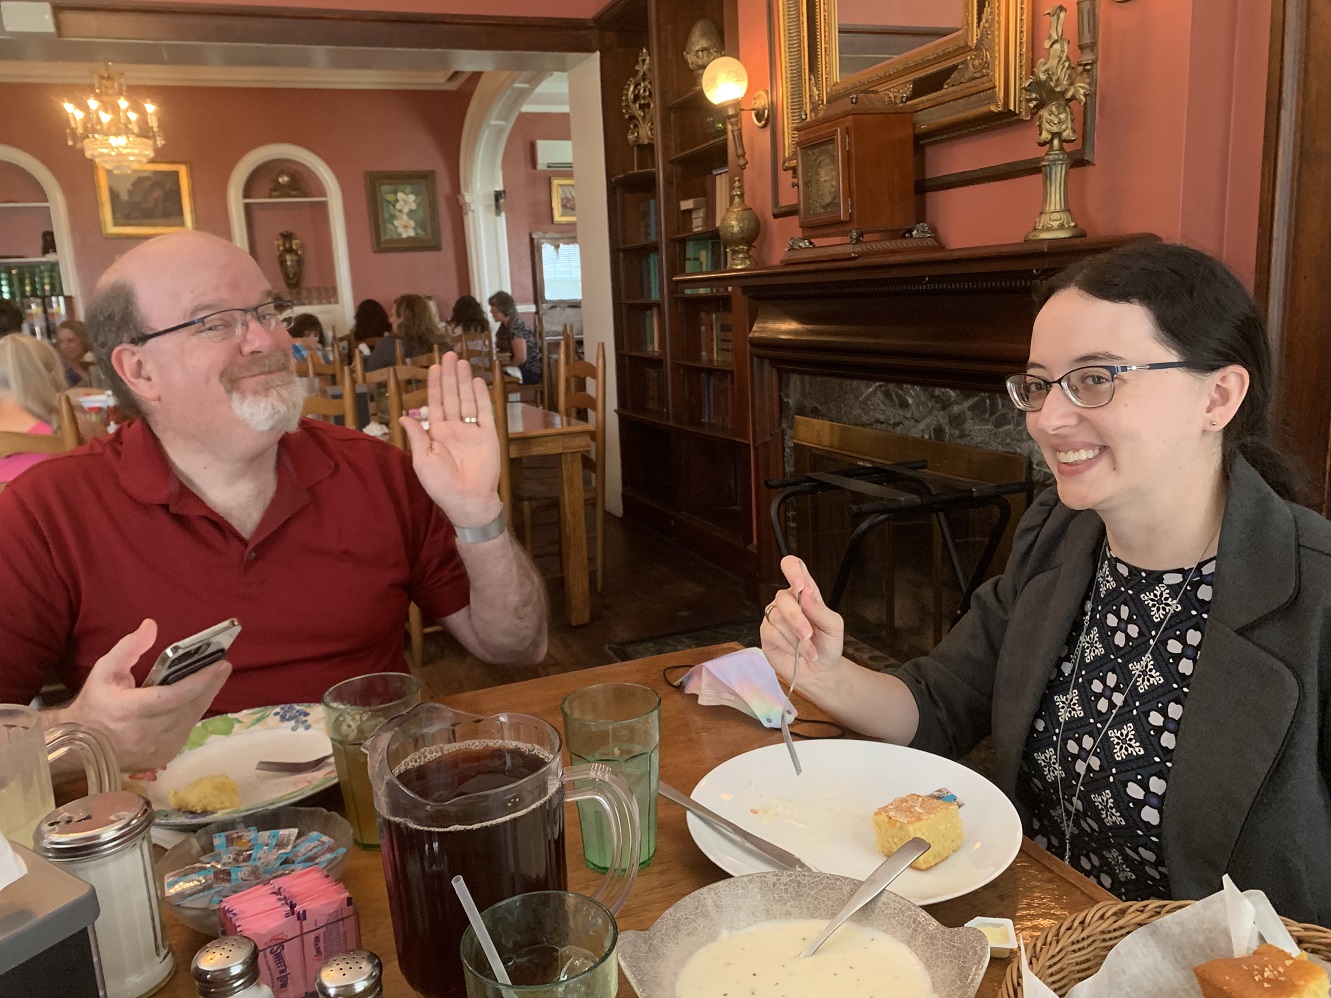 Katy and James smiling at a restaurant table. James is waving to the camera again, and both have plates in front of them with biscuits and cornbread. There is also ice tea and a white gravy visible on the table. The background shows the restaurant's historical architectural features, including a marble fireplace, built-in shelves, and chandeliers, plus eclectic antique décor. 